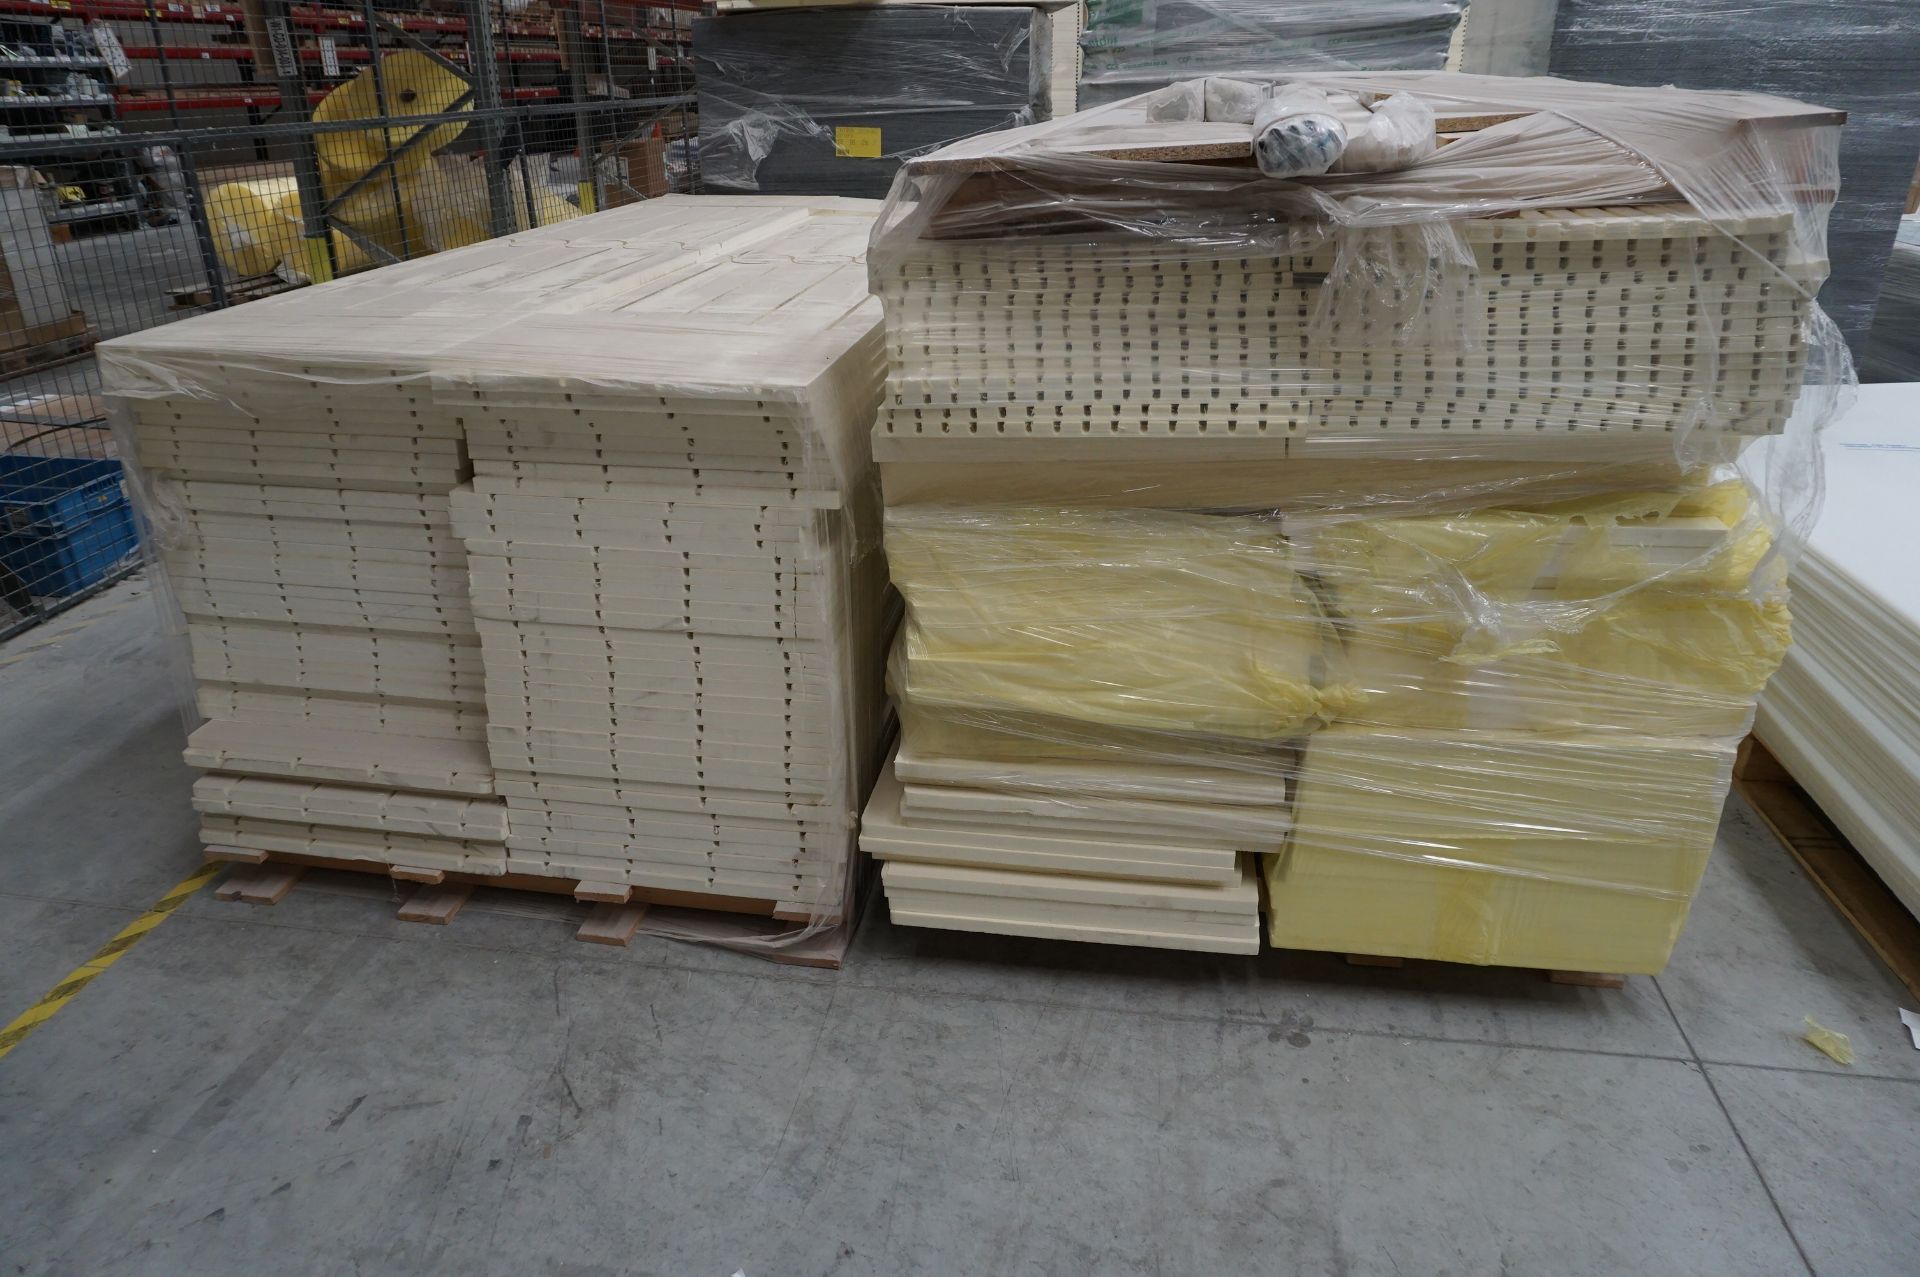 Quiet, Step T4 floor insulation on two pallets, approx. 700 sheets, 1190 x 593mm - Image 3 of 12